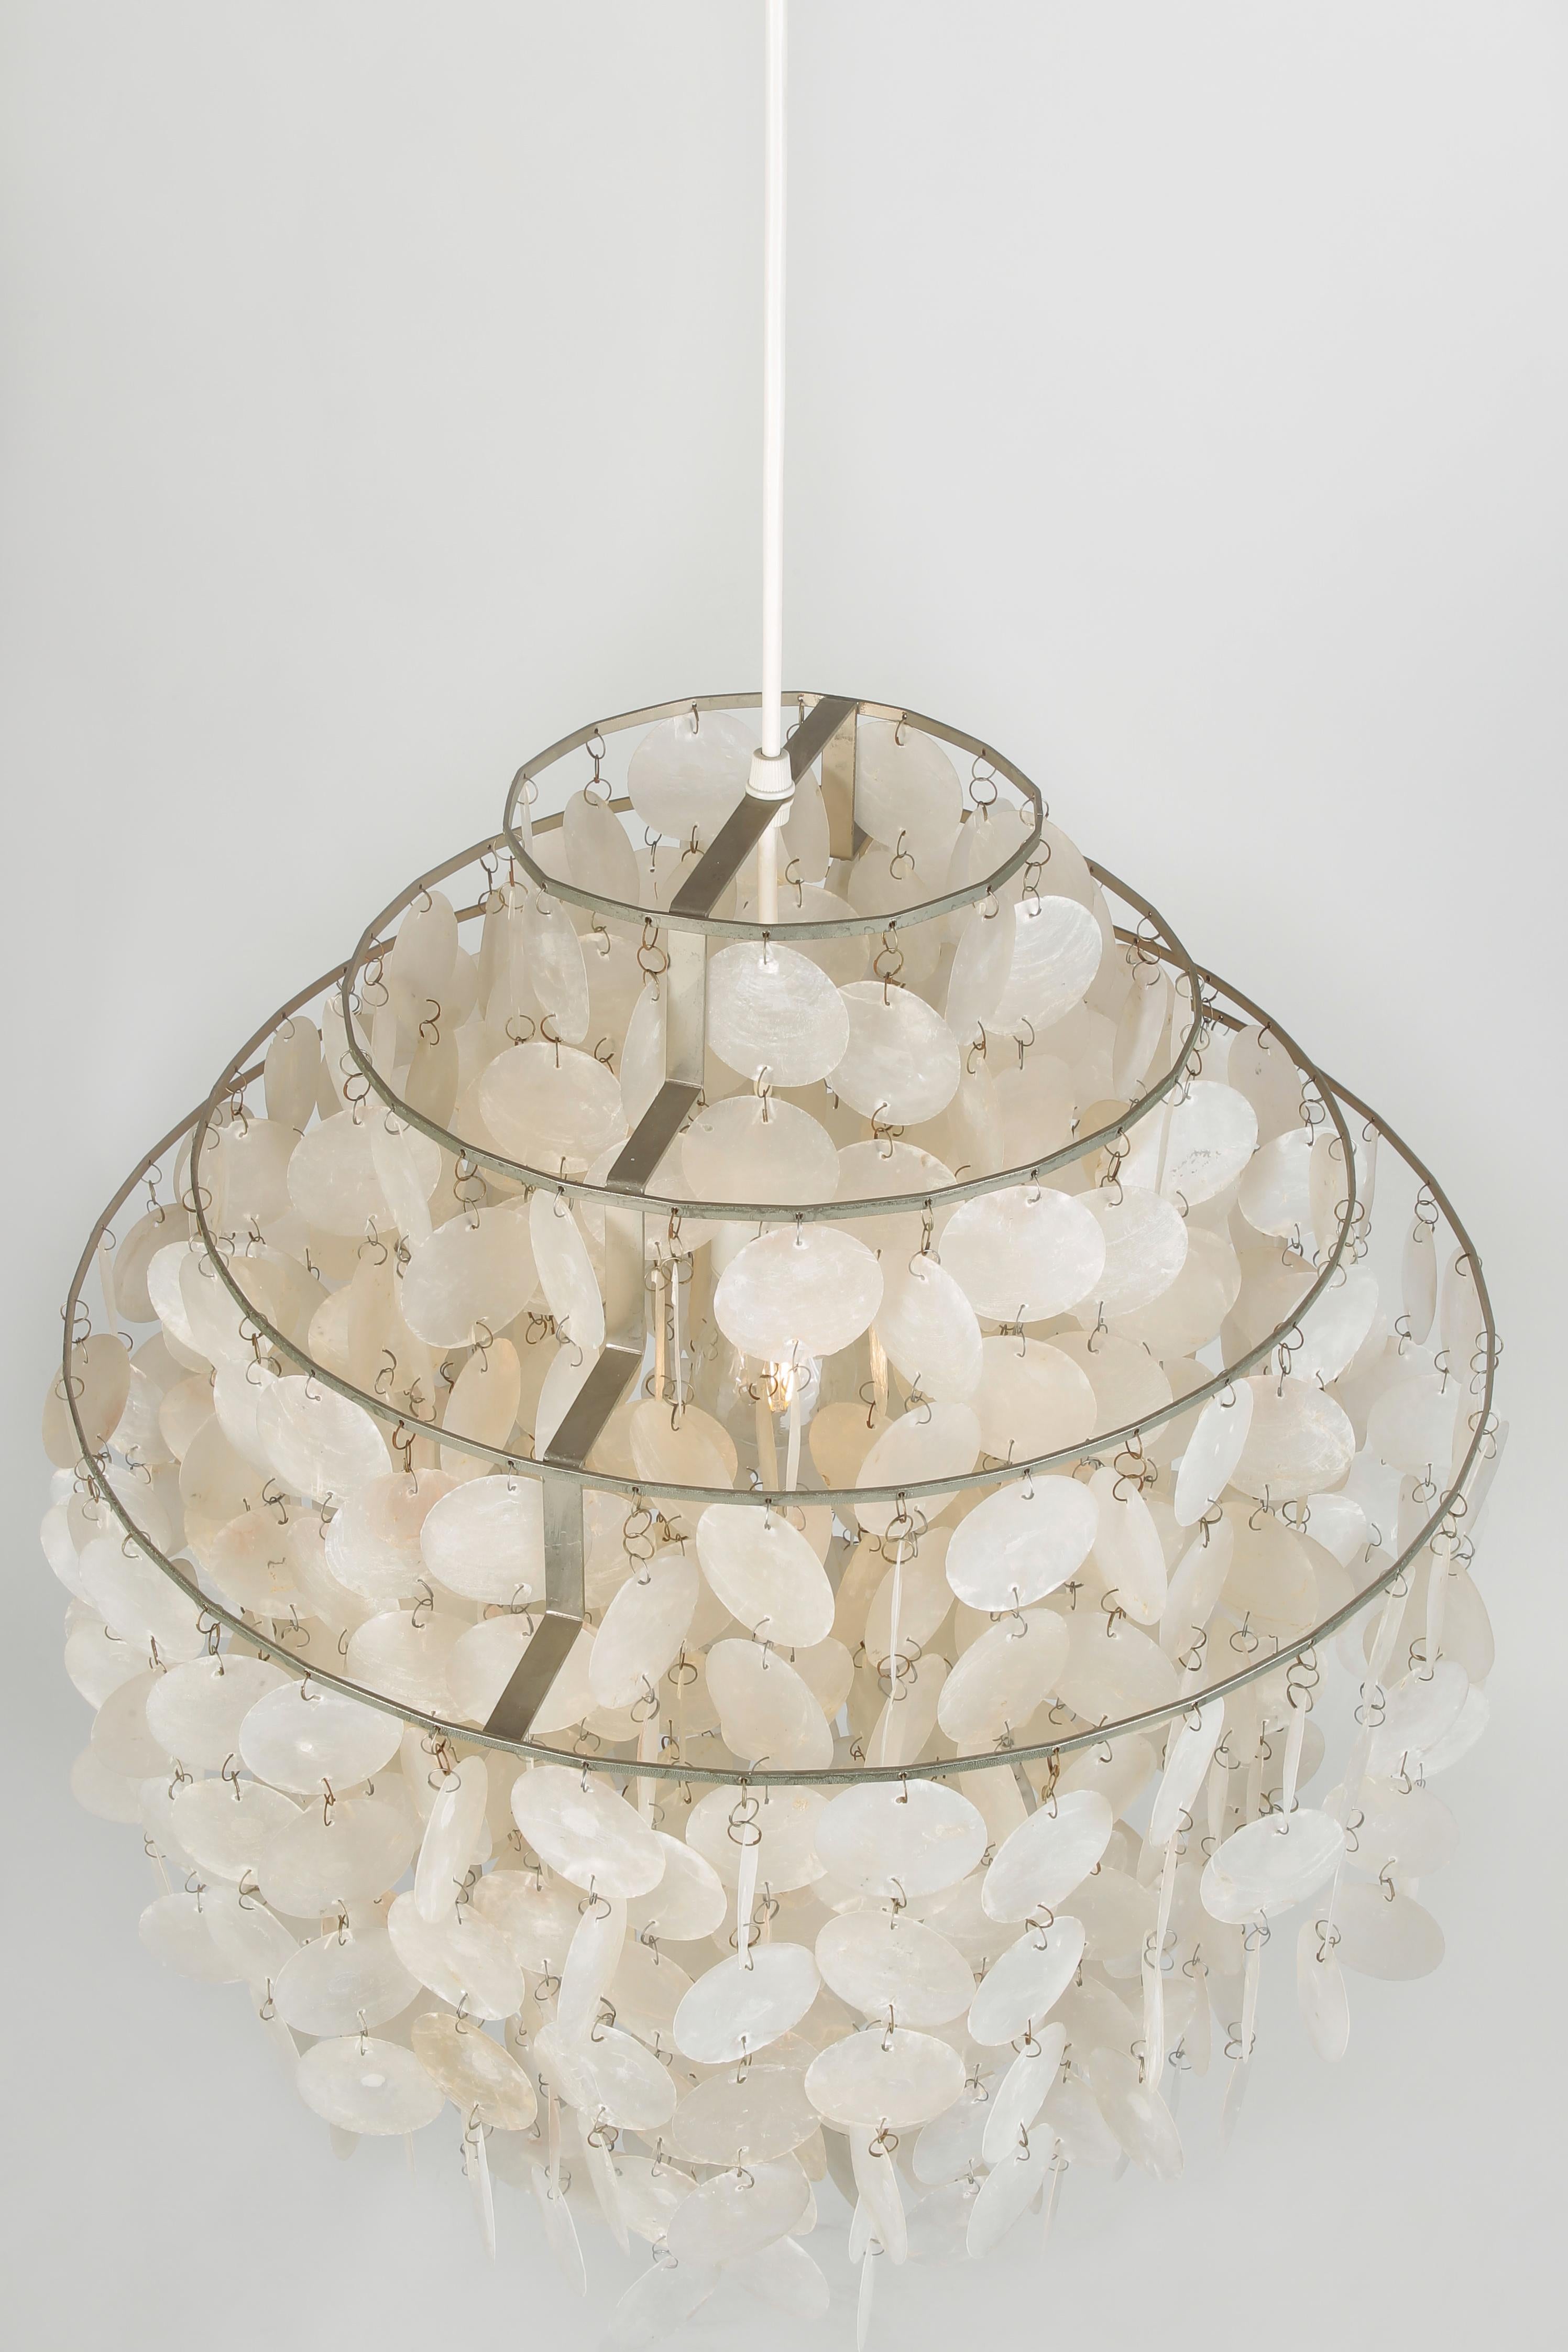 Shell lamp by Verner Panton made by J. Luber in Basel in the 1960s. Iconic design made of intricate, interlinked mother of pearl discs. Four-tiered model. Very good condition.